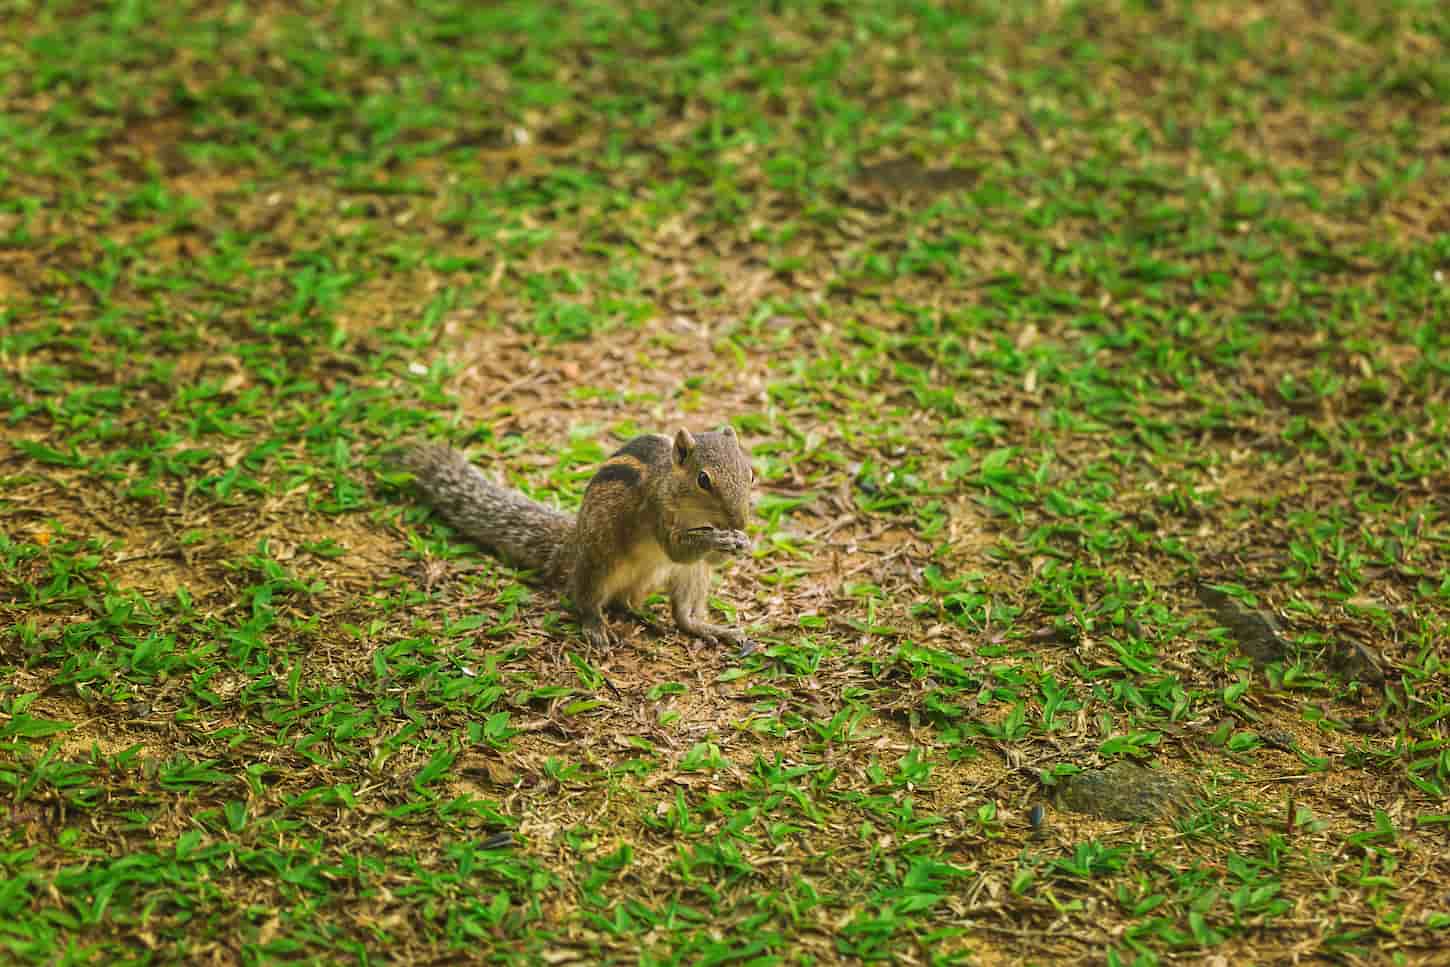 An image of a small chipmunk trying to find eat on the green lawn.